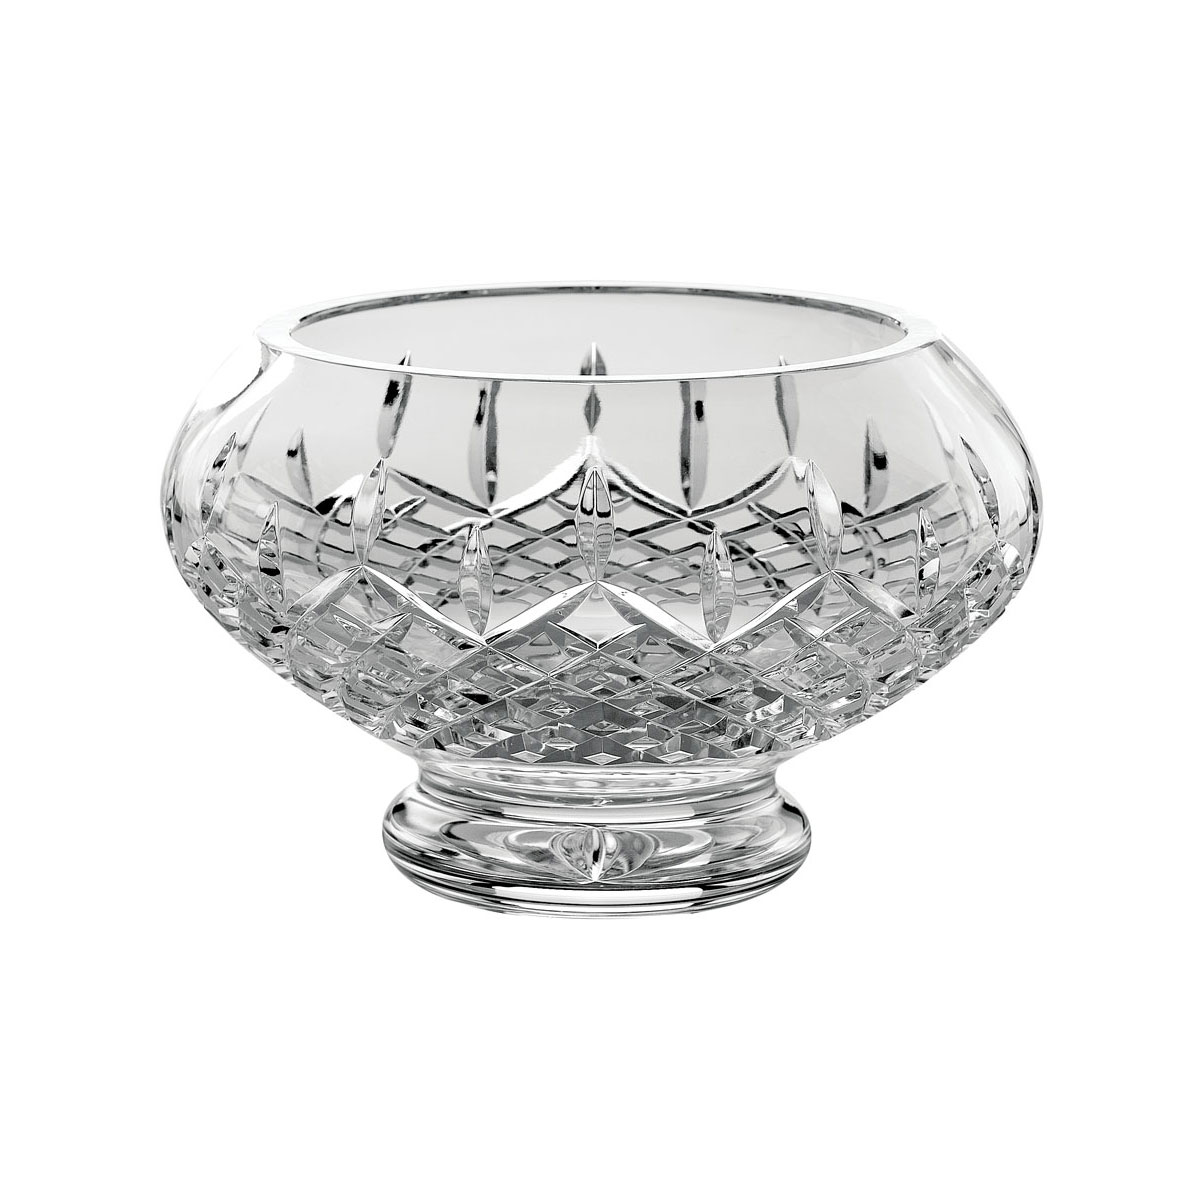 Galway Crystal Longford 10" Footed Bowl